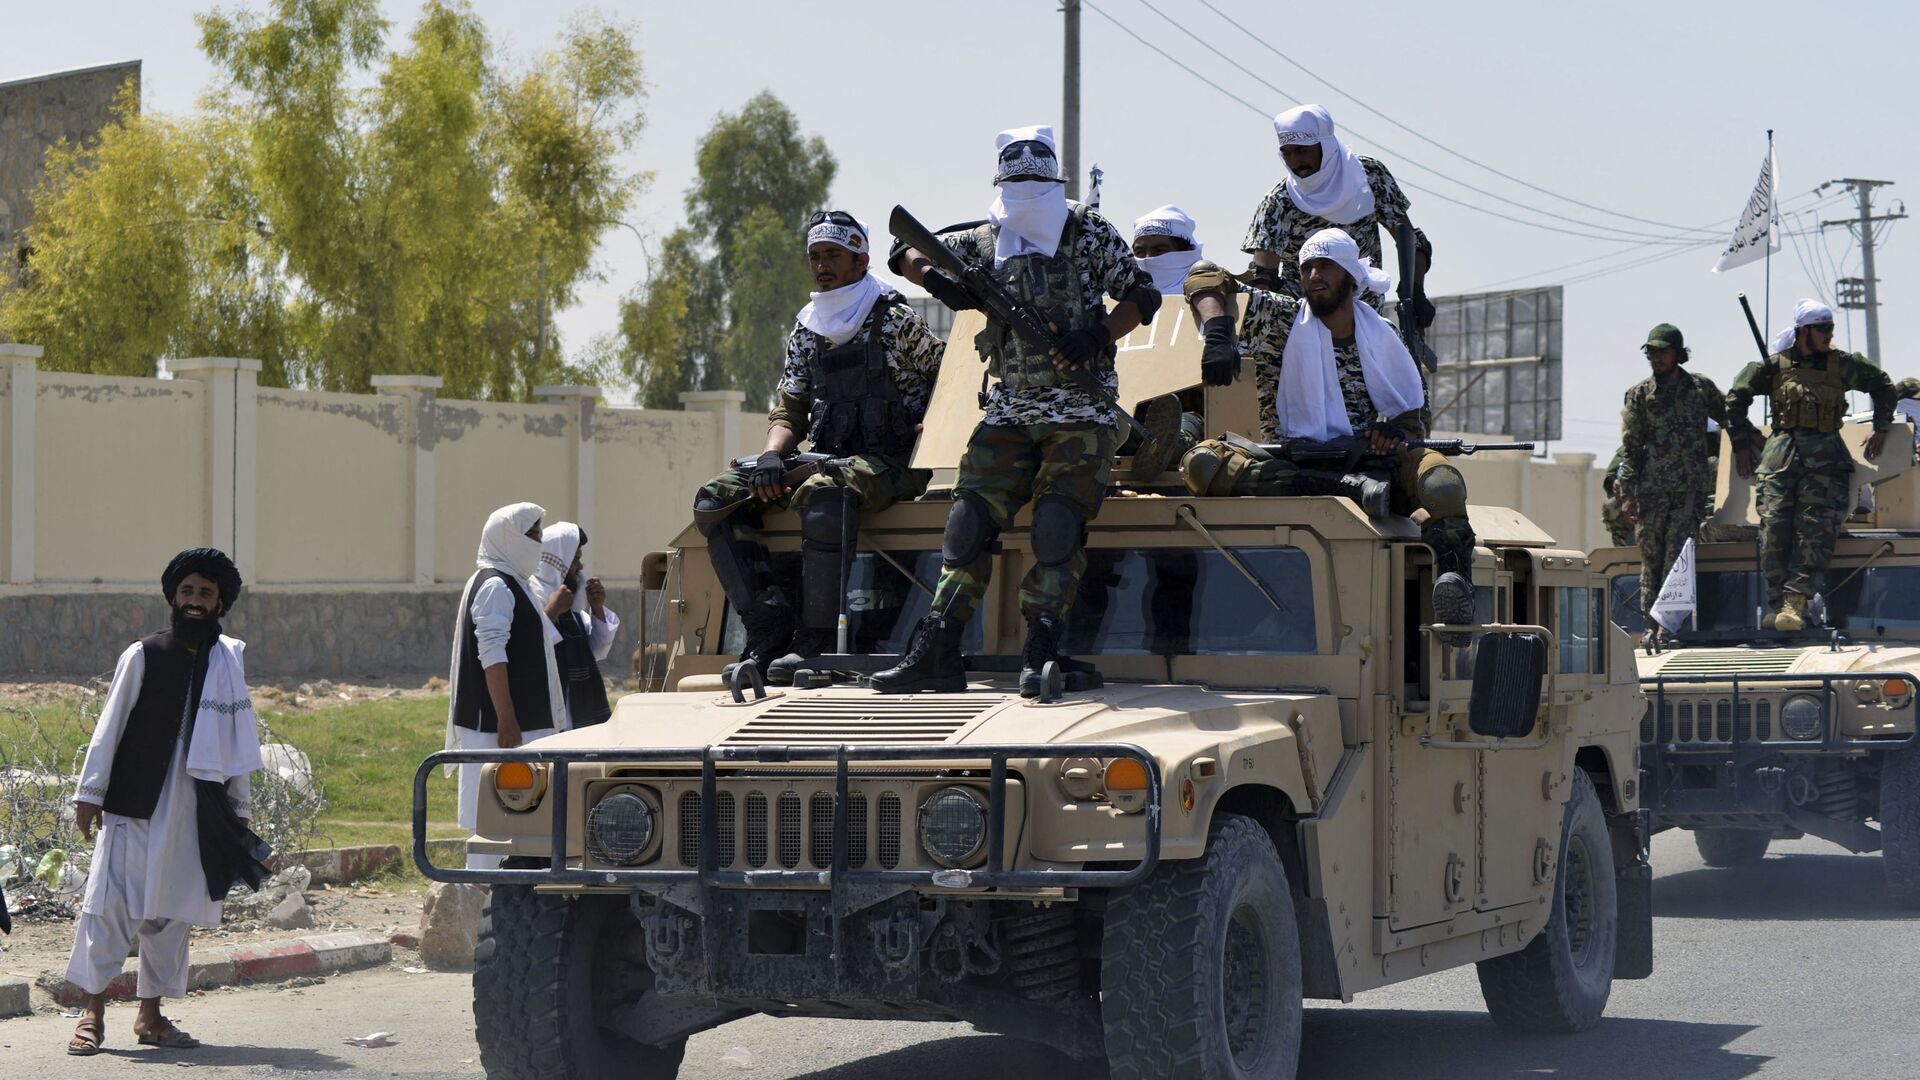 Taliban fighters atop Humvee vehicles parade along a road to celebrate after the US pulled all its troops out of Afghanistan, in Kandahar on 1 September 2021 following the Taliban’s military takeover of the country - Sputnik International, 1920, 06.09.2021